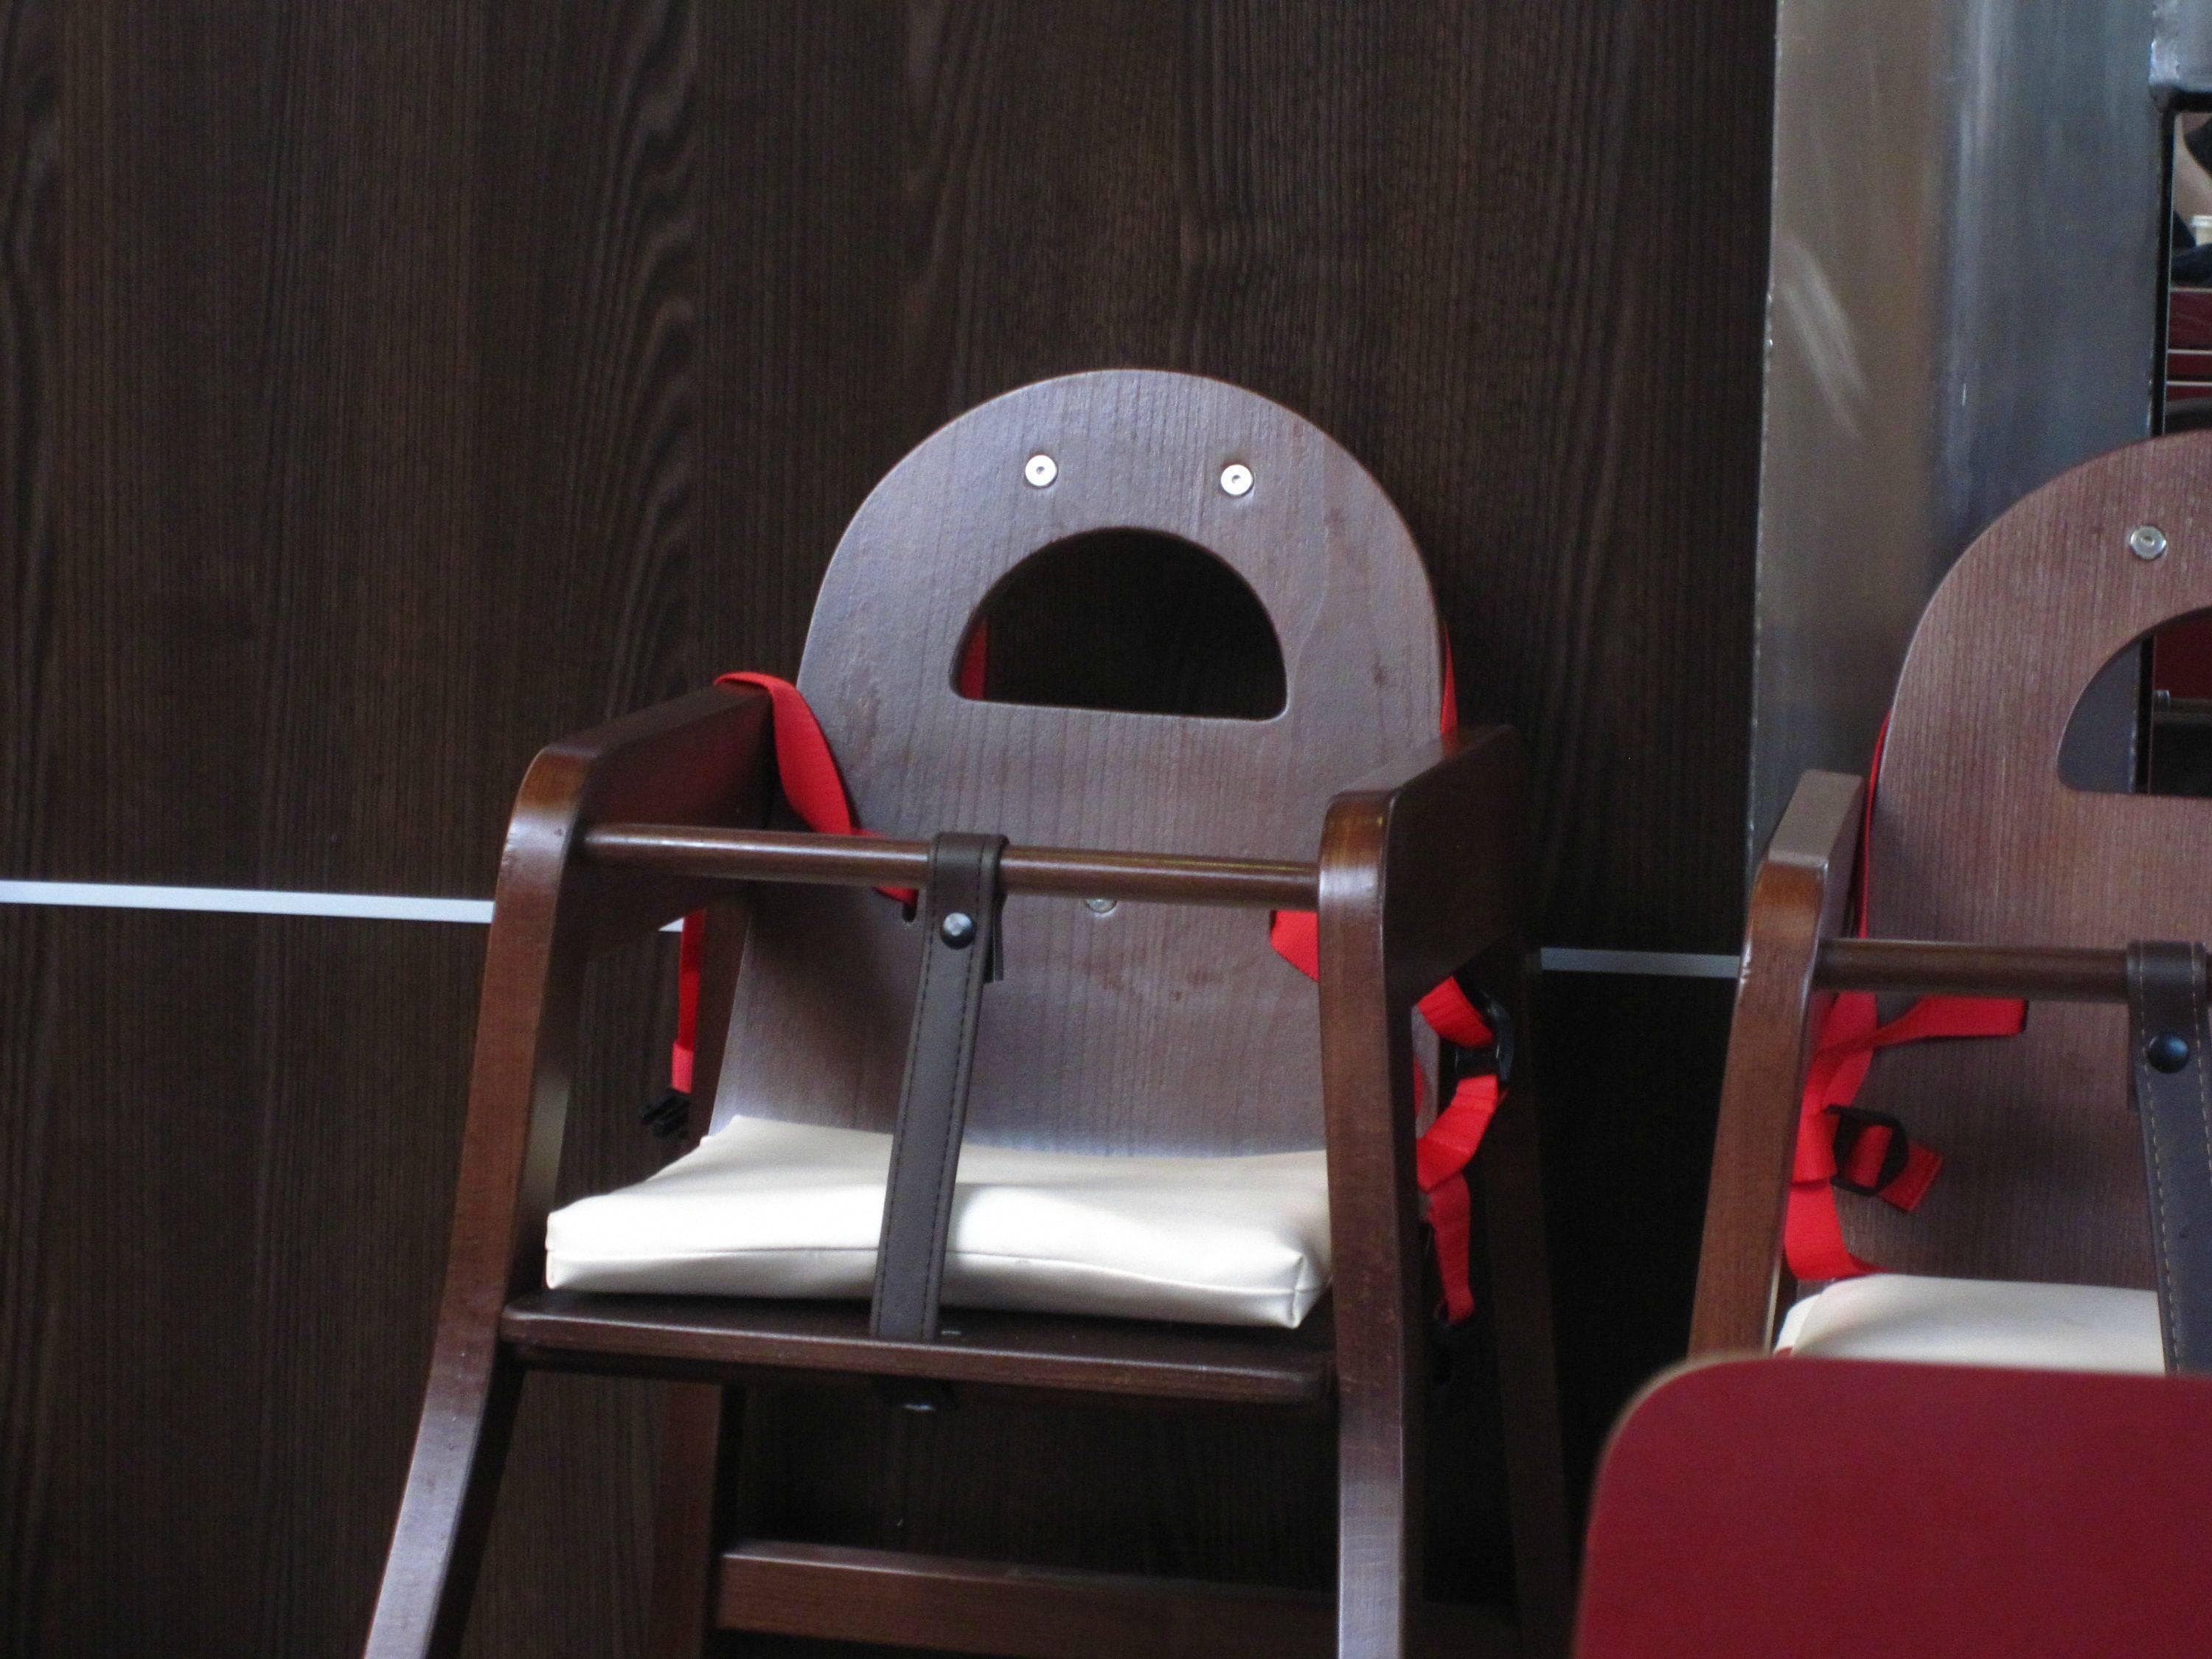 This High Chair on Random Inanimate Objects Who Look Terrified